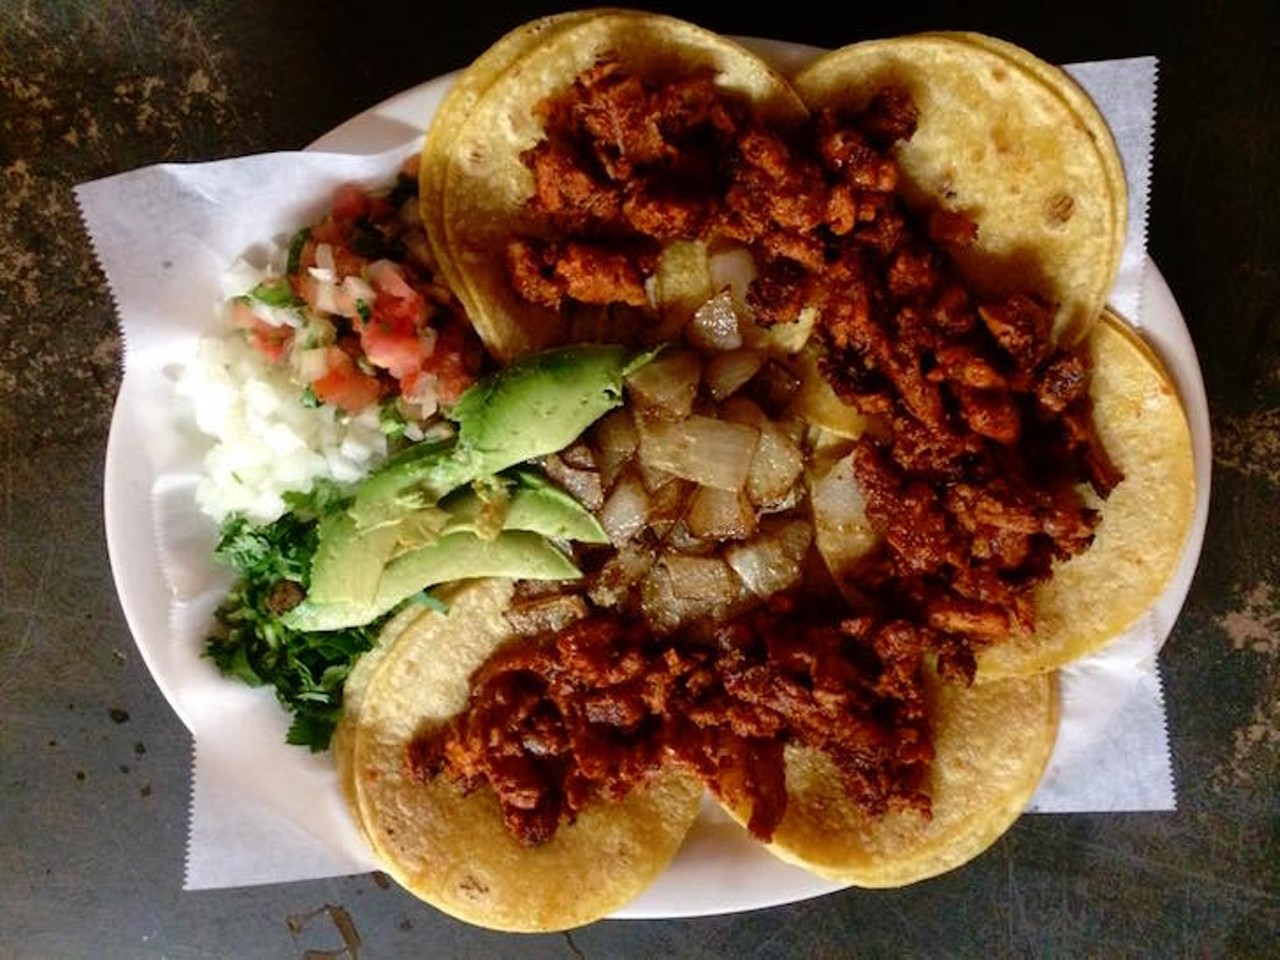 El Gallito De Jalisco 
9226 Wurzbach Road, (210) 614-7114 
Mini tacos are perfect for any day of the week and any meal of the day and El Gallito serves up their five mini tacos and a soda all for $6.50 every week. Don&#146;t miss the burritos for $4.50. 
Photo via Facebook (El Gallito De Jalisco Mobile Taco Truck)